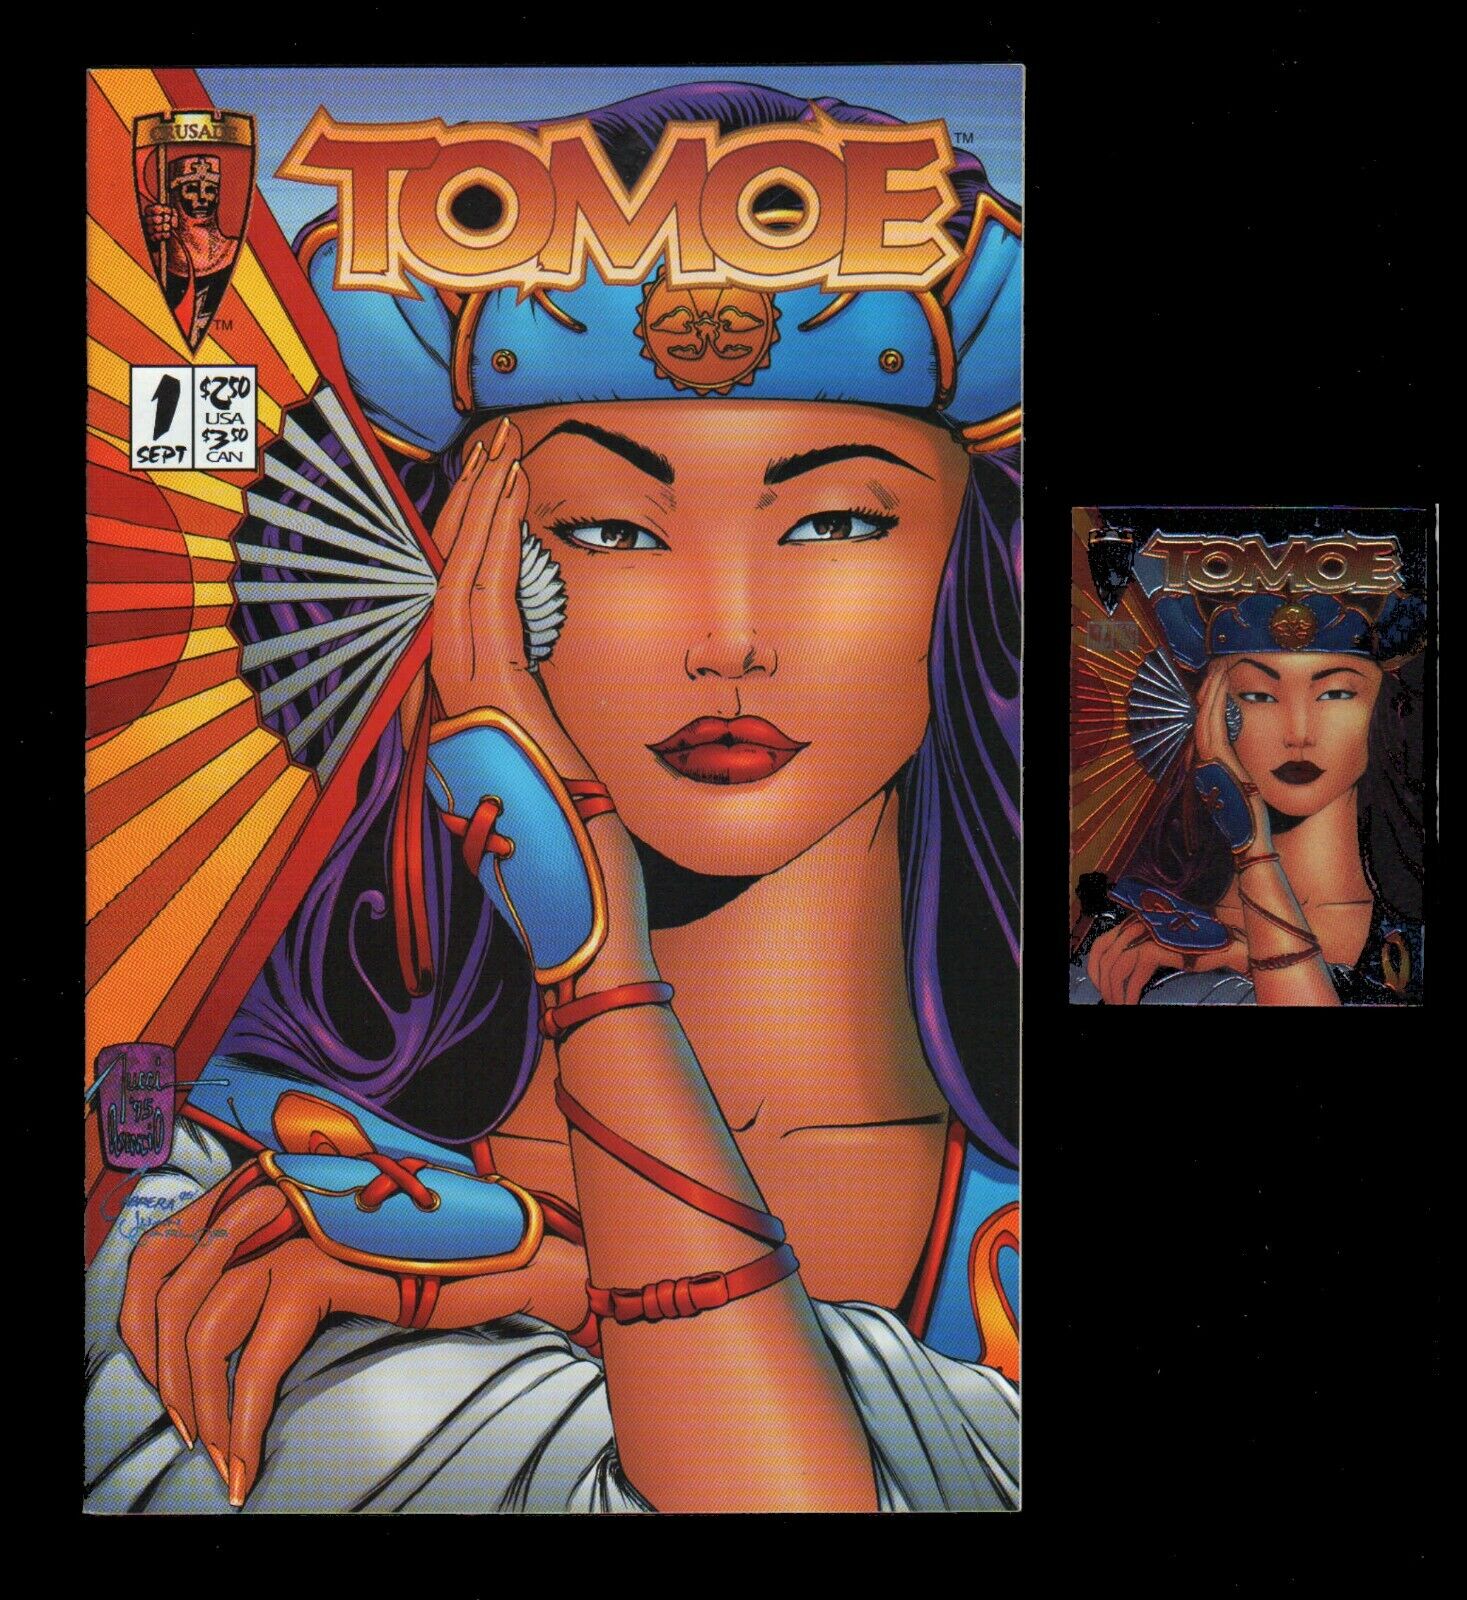 Comic: Sept 1995 SHI Way Of The Warrior #6 [Reflects the TOMOE #1 cover] + Card